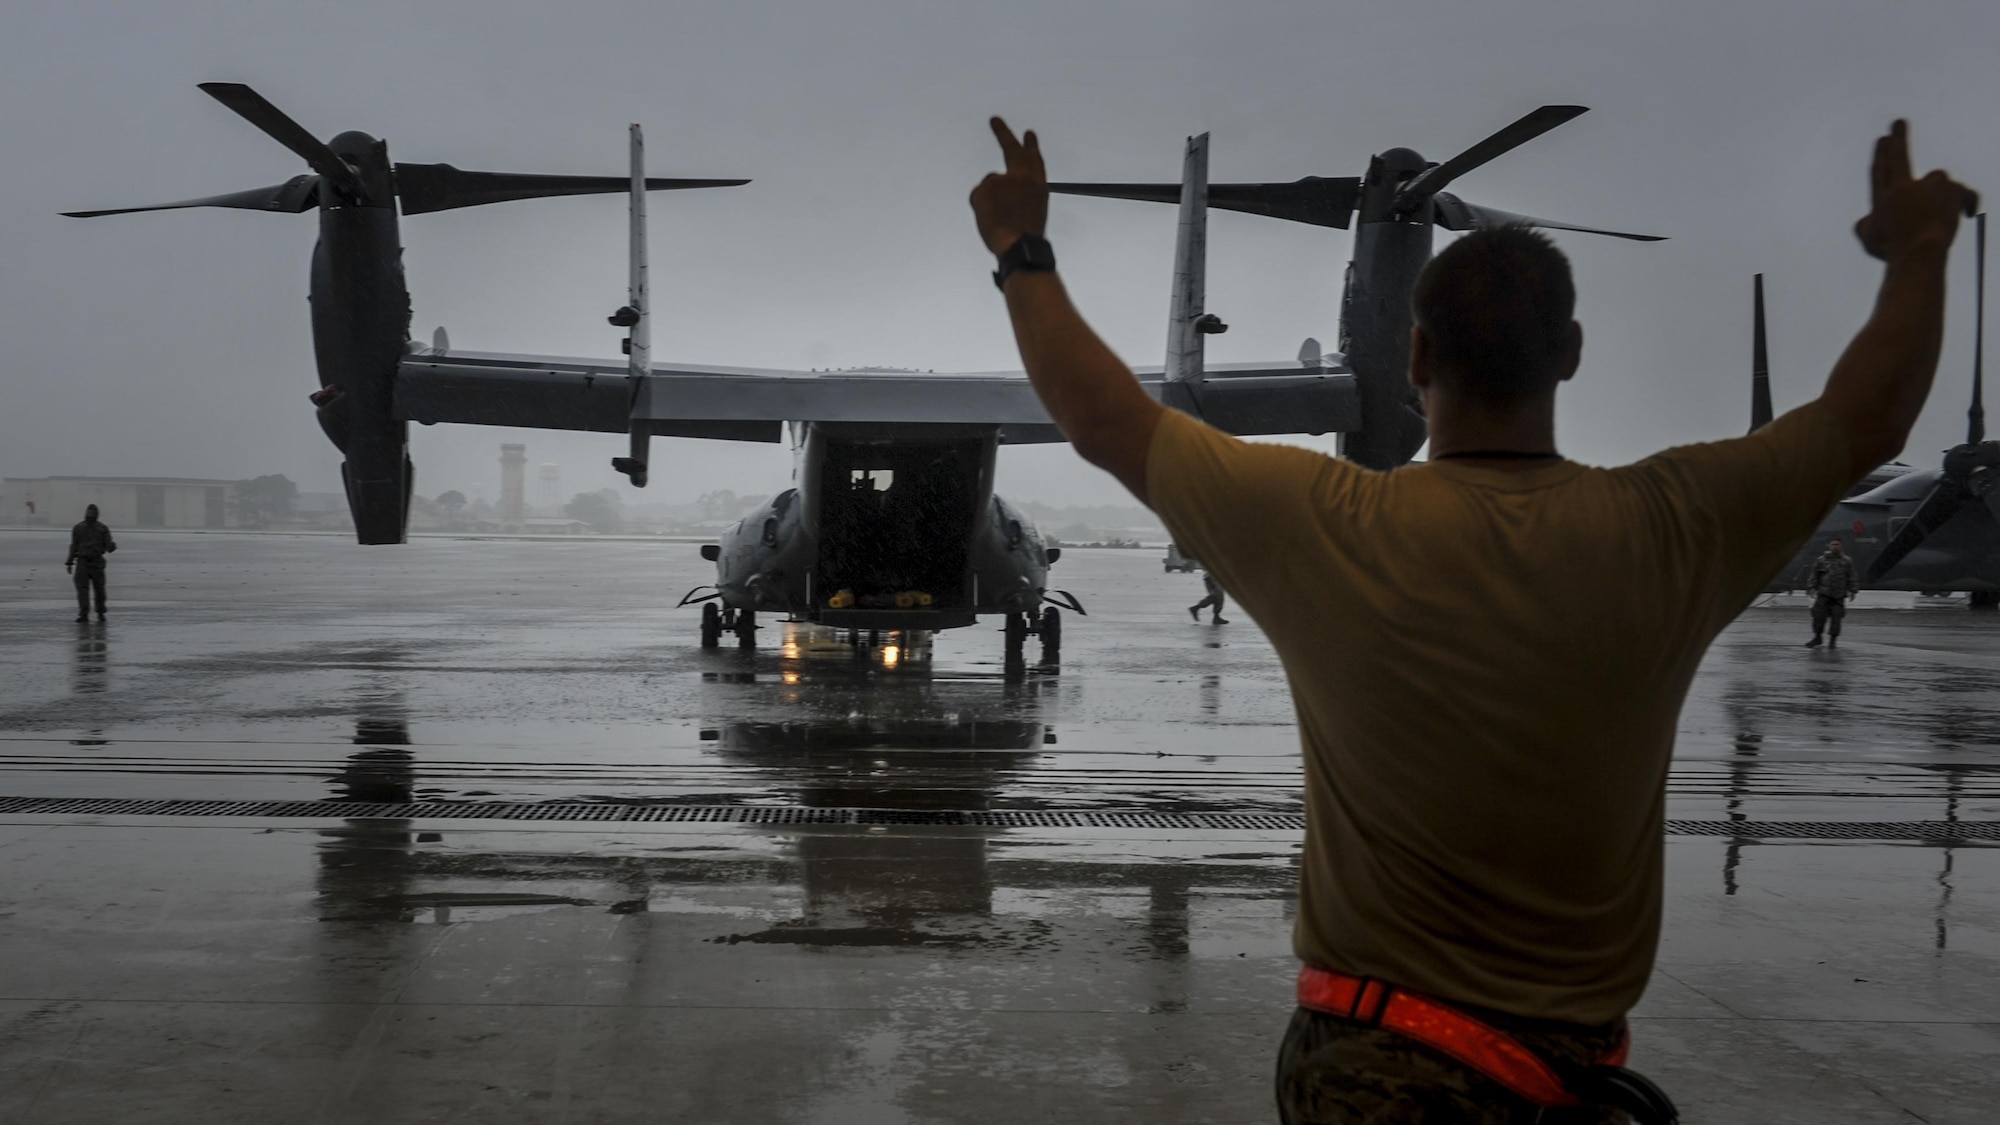 Staff Sgt. Robert Hillyard, a crew chief with the 801st Special Operations Aircraft Maintenance Squadron, guides a CV-22B Osprey tiltrotor aircraft into the Freedom Hangar at Hurlburt Field, Fla., Aug. 11, 2016. The CV-22 was brought into the hangar for scheduled maintenance. (U.S. Air Force photo by Airman Dennis Spain)